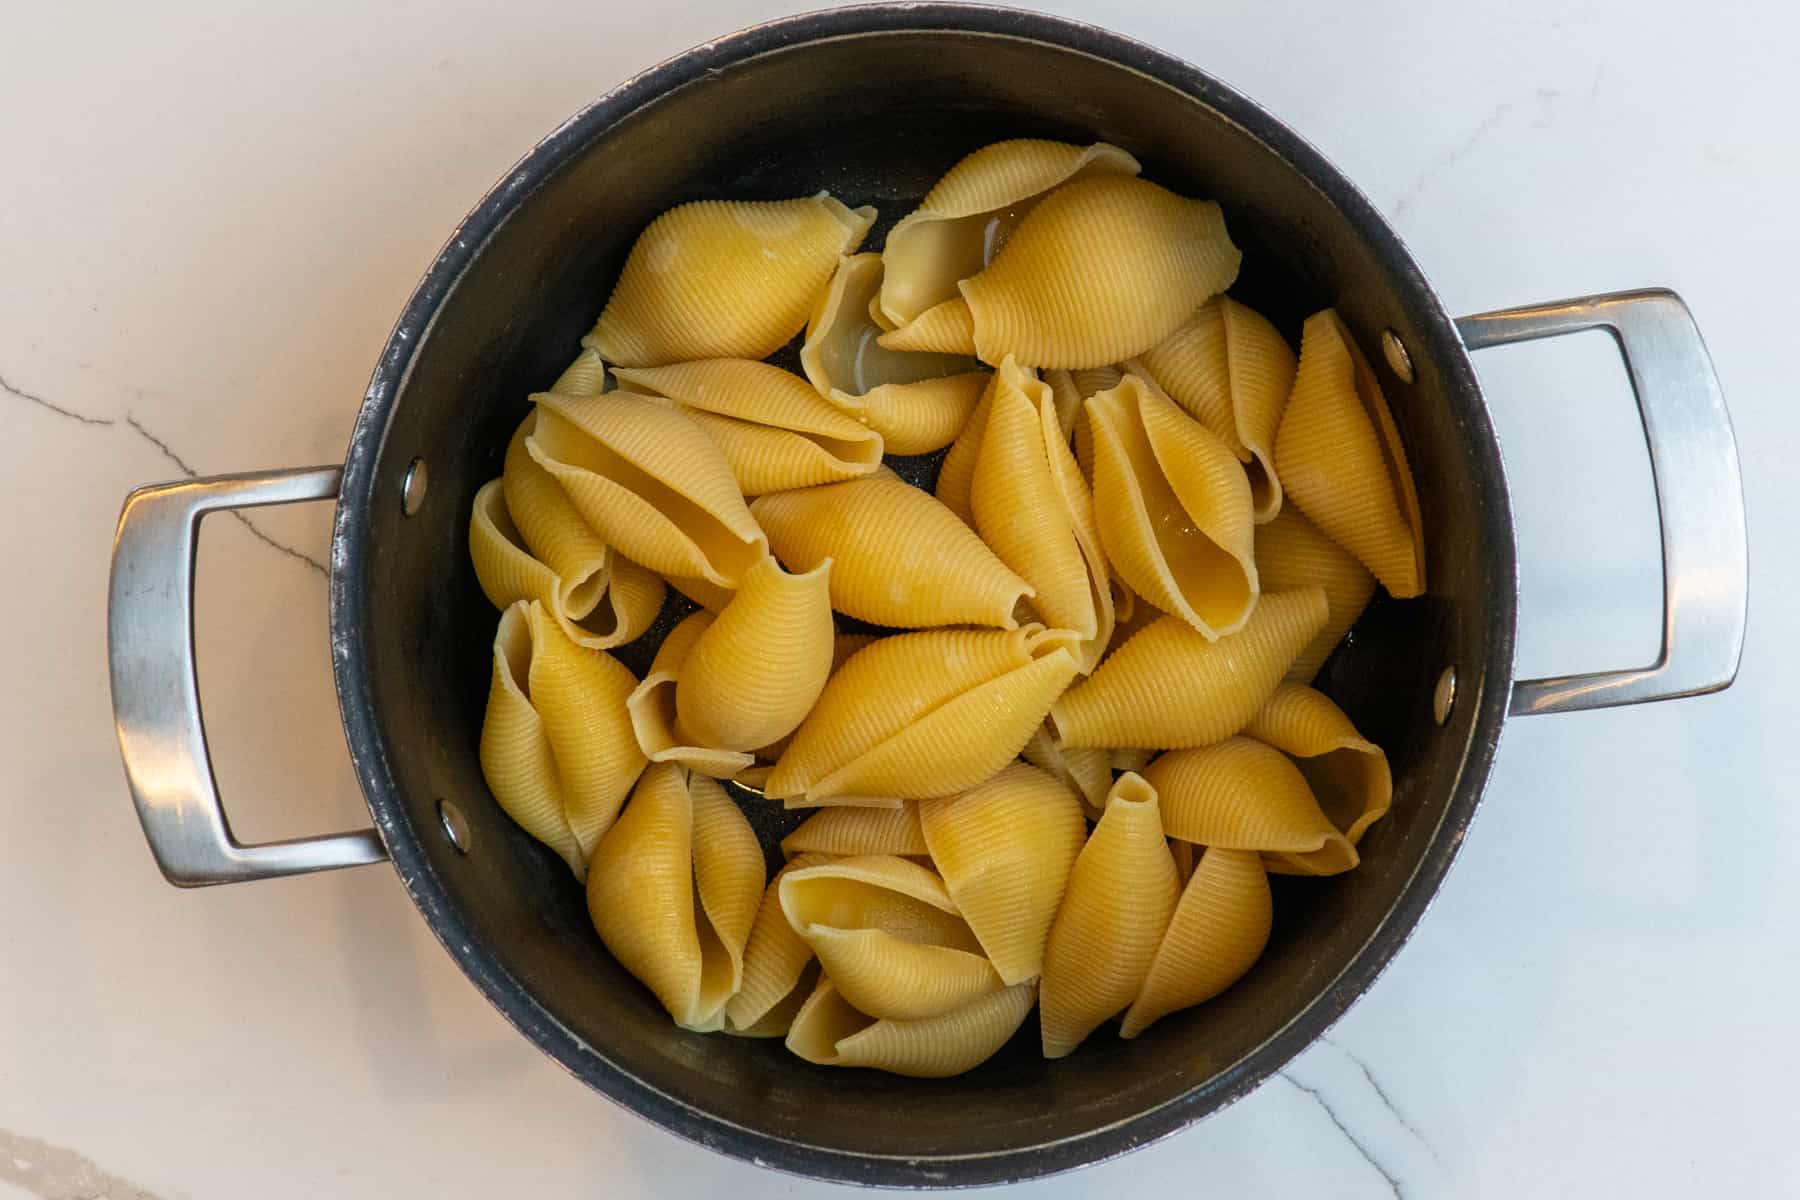 Cooked pasta shells in a pot.